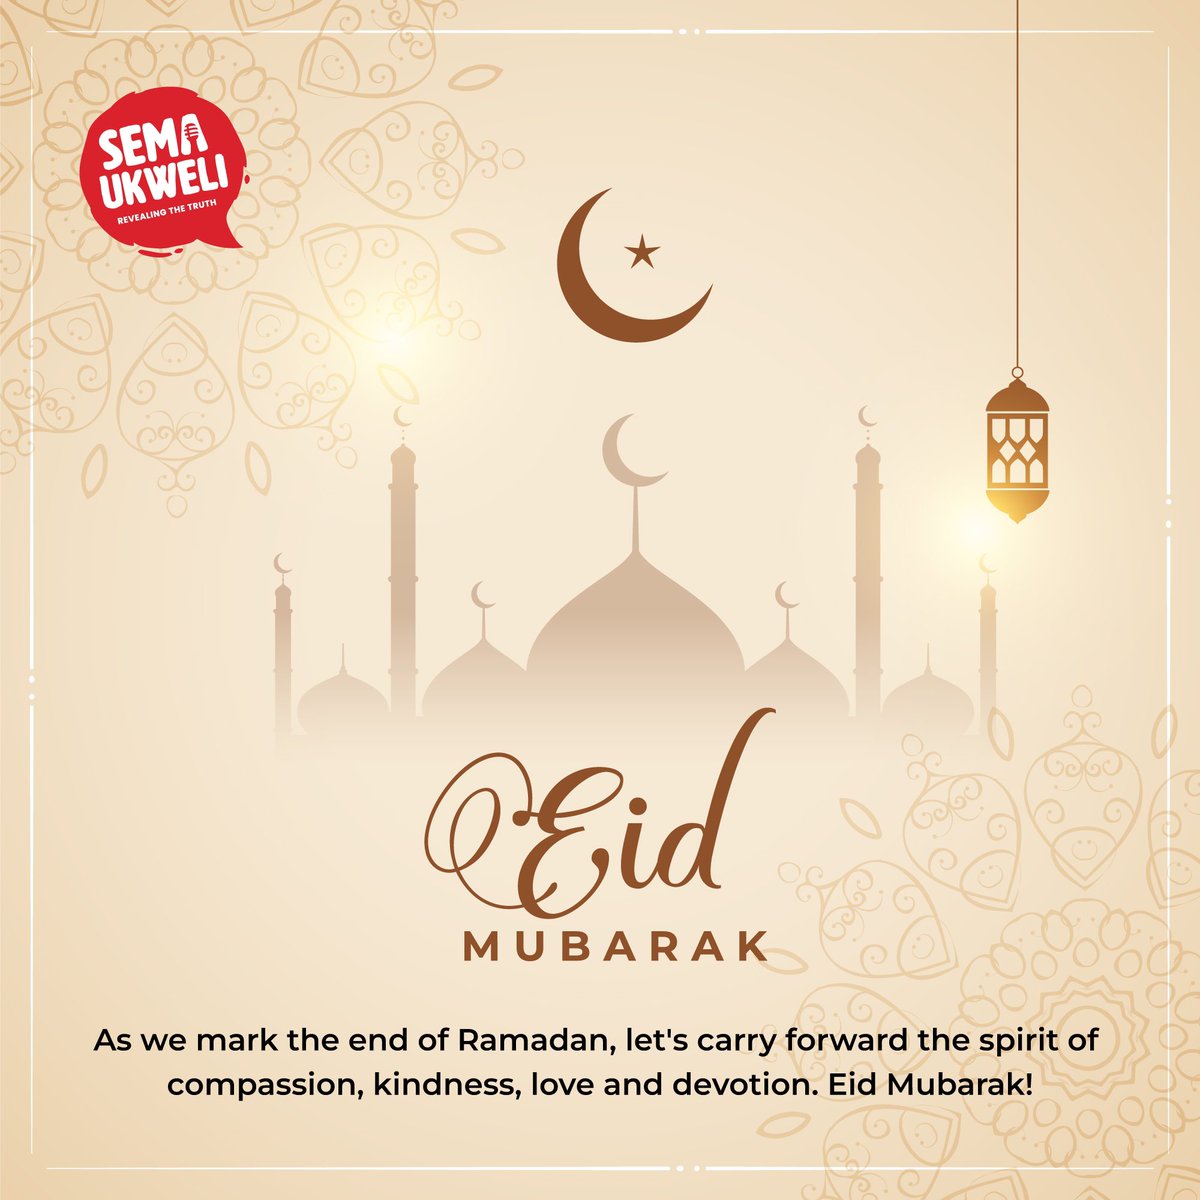 Eid Mubarak to all our Muslim Brothers and Sisters as you close this period of self-reflection and prayer. Blessings to you and your loved ones. #SemaUkweli #Eidmubarak2024 #Eid2024 #EidAlFitr